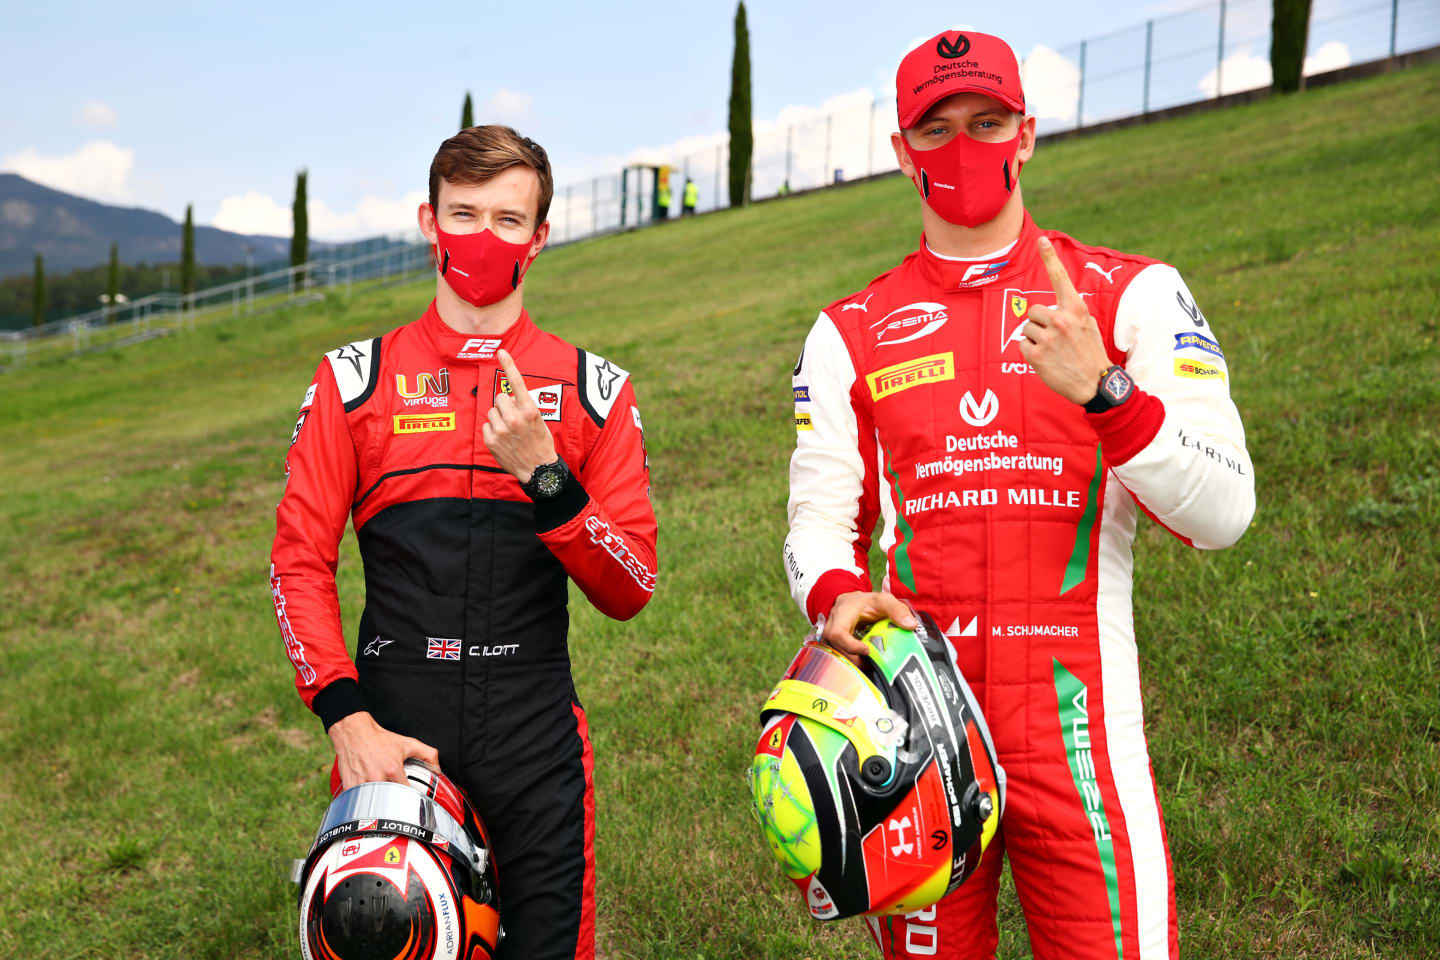 SCARPERIA, ITALY - SEPTEMBER 10: Feature race winner in Monza, Mick Schumacher of Germany and Prema